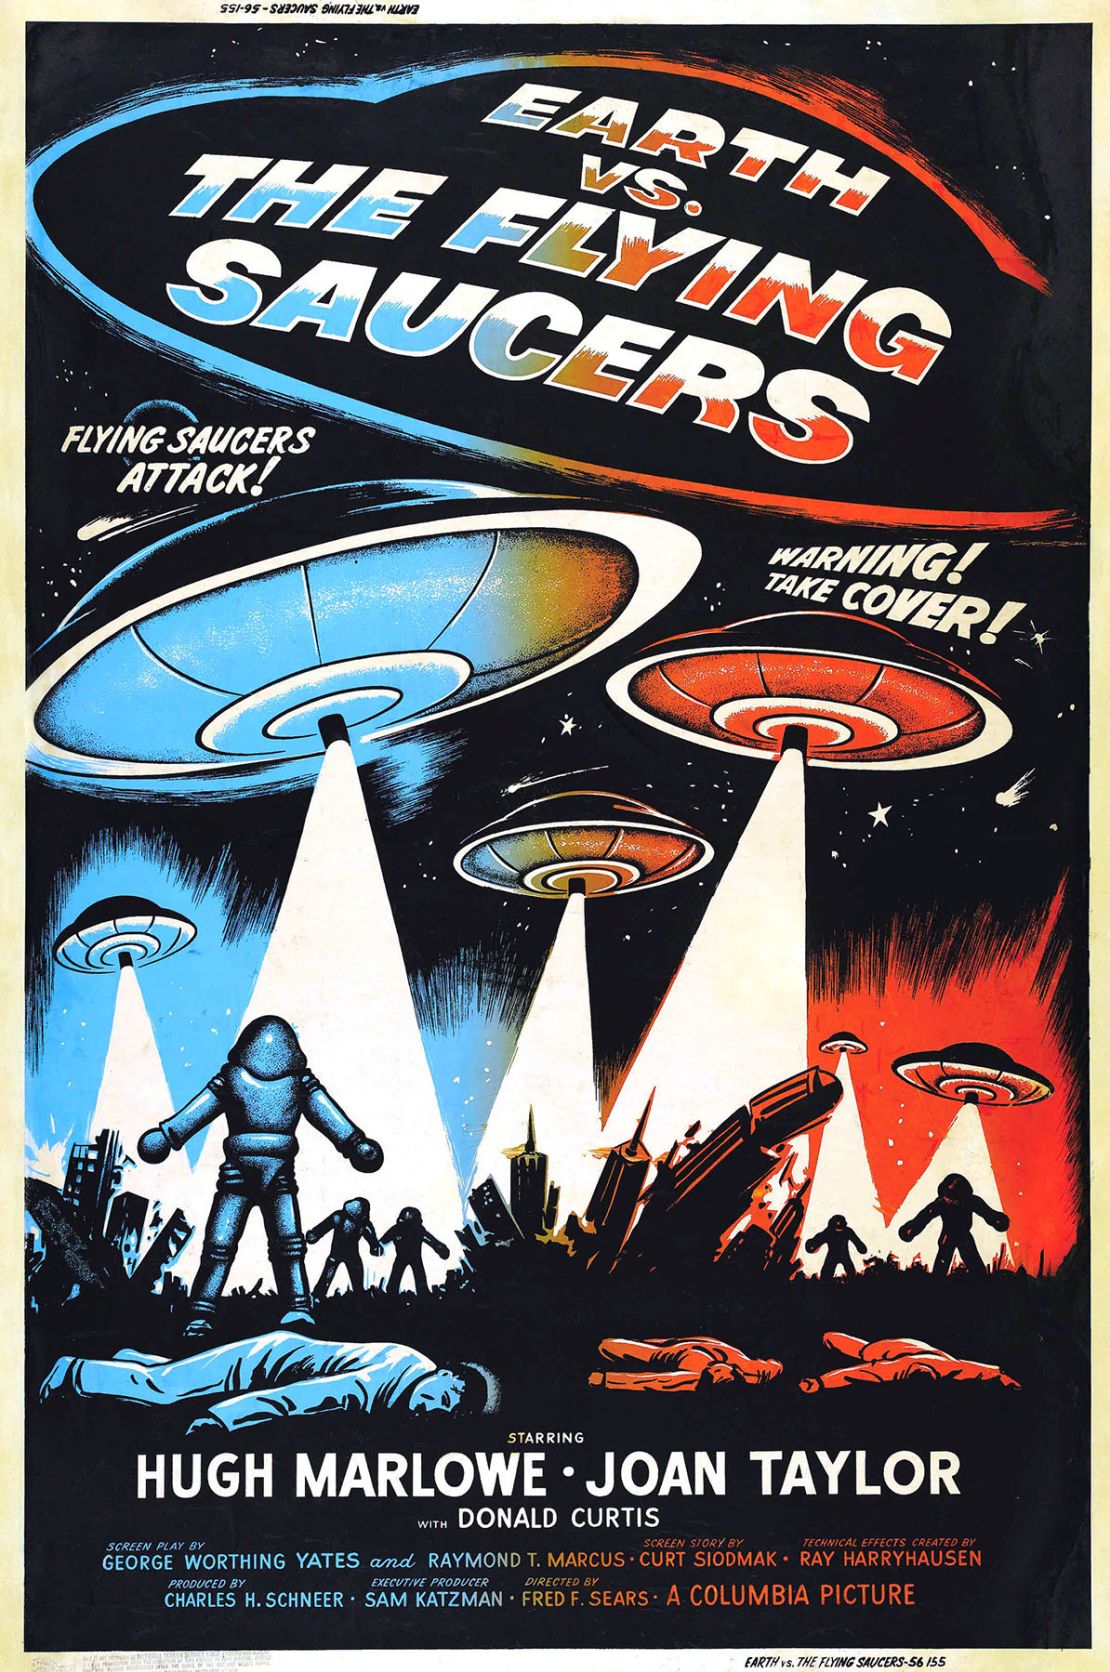 A movie poster from the 1950s shows how Hollywood envisioned UFOs